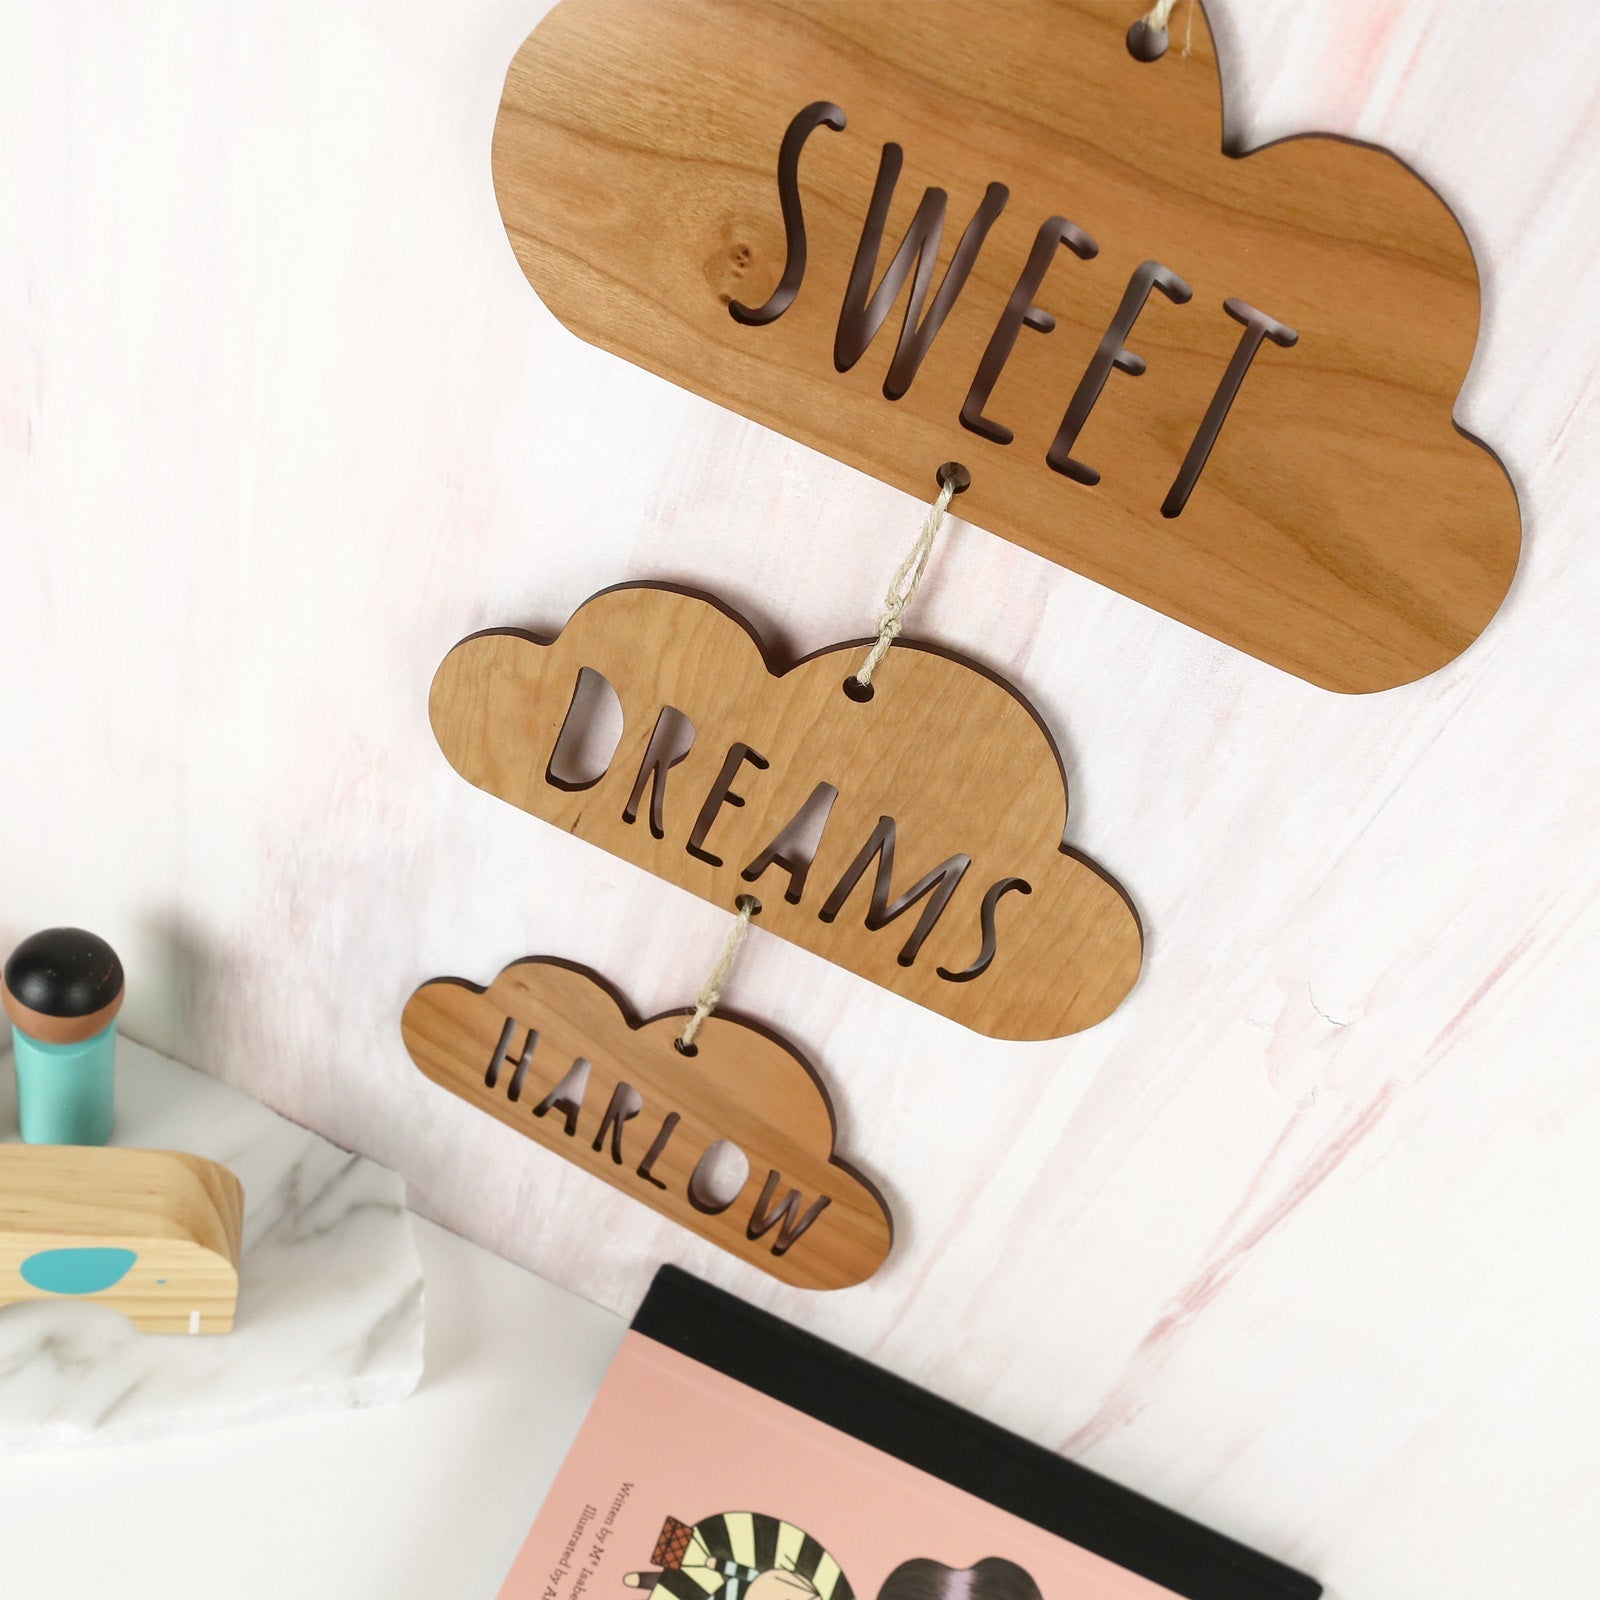 Sweet Dreams bedroom sign made from wood and personalised